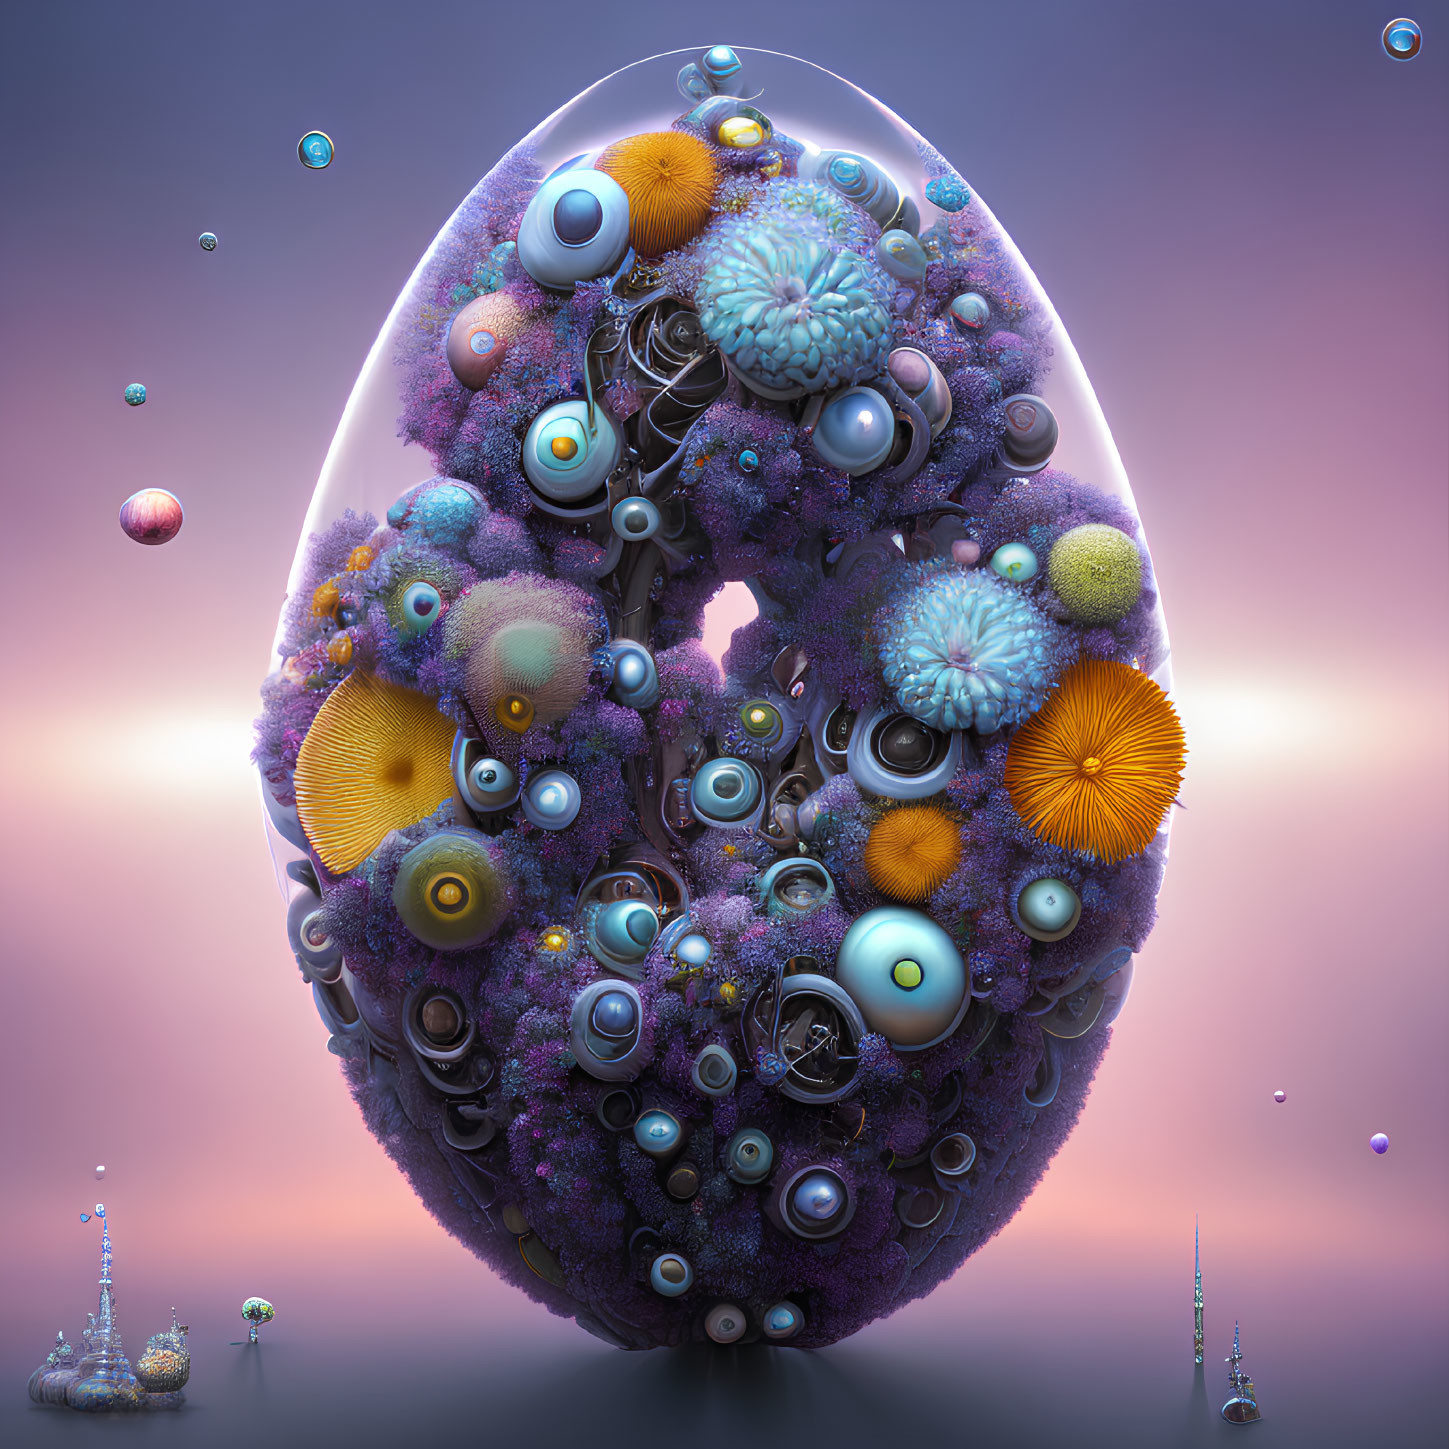 Colorful Egg-shaped Structure with Orbs and Textures on Purple Background